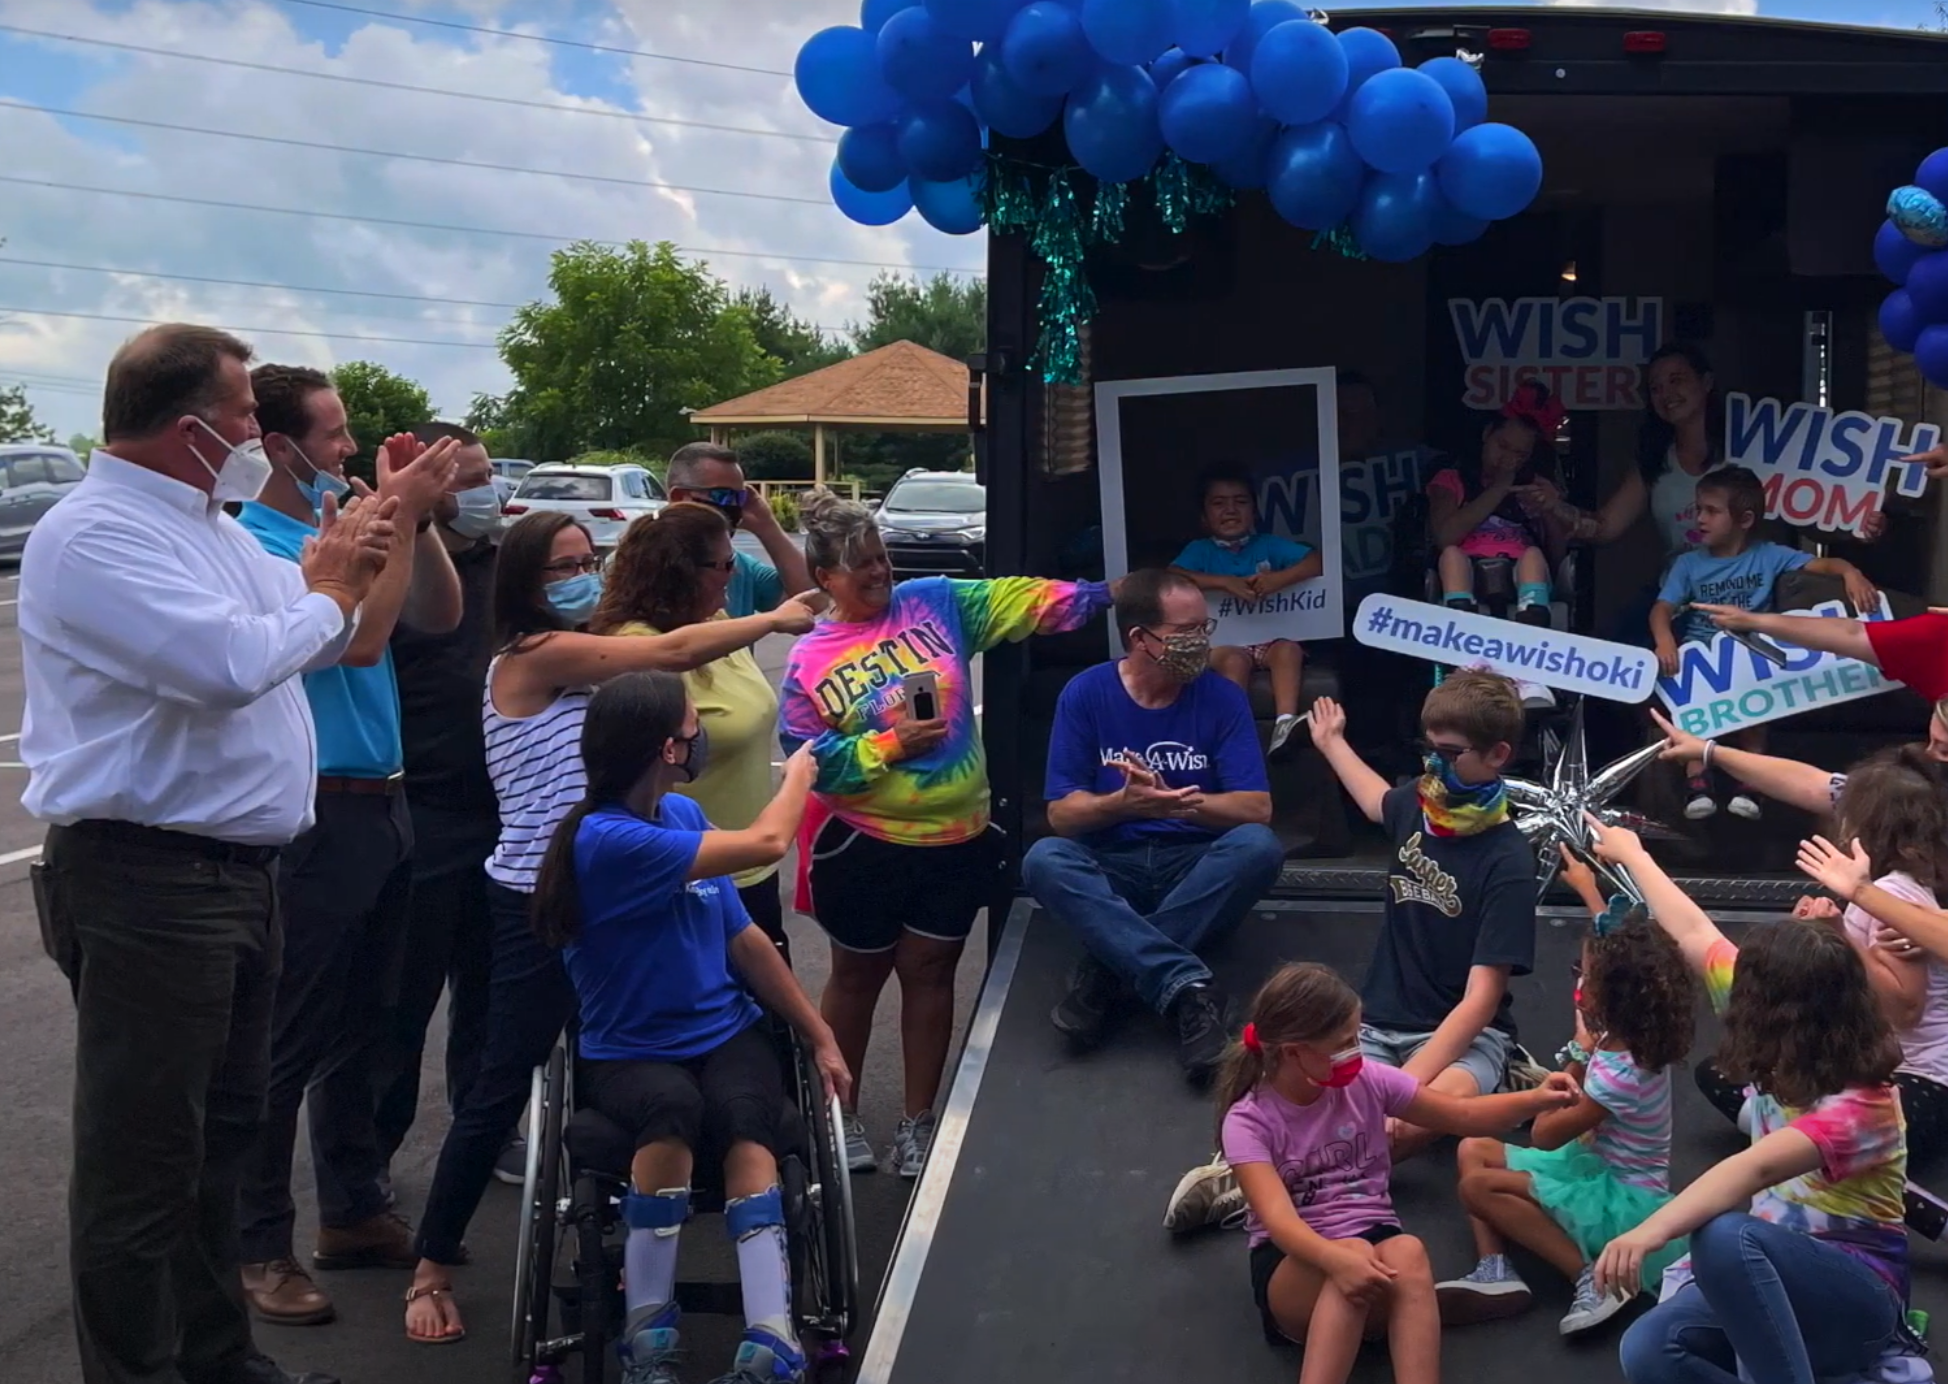 Make-A-Wish® wish kid Sammy celebrates his Wish Reveal with family, friends and Indianapolis community members.